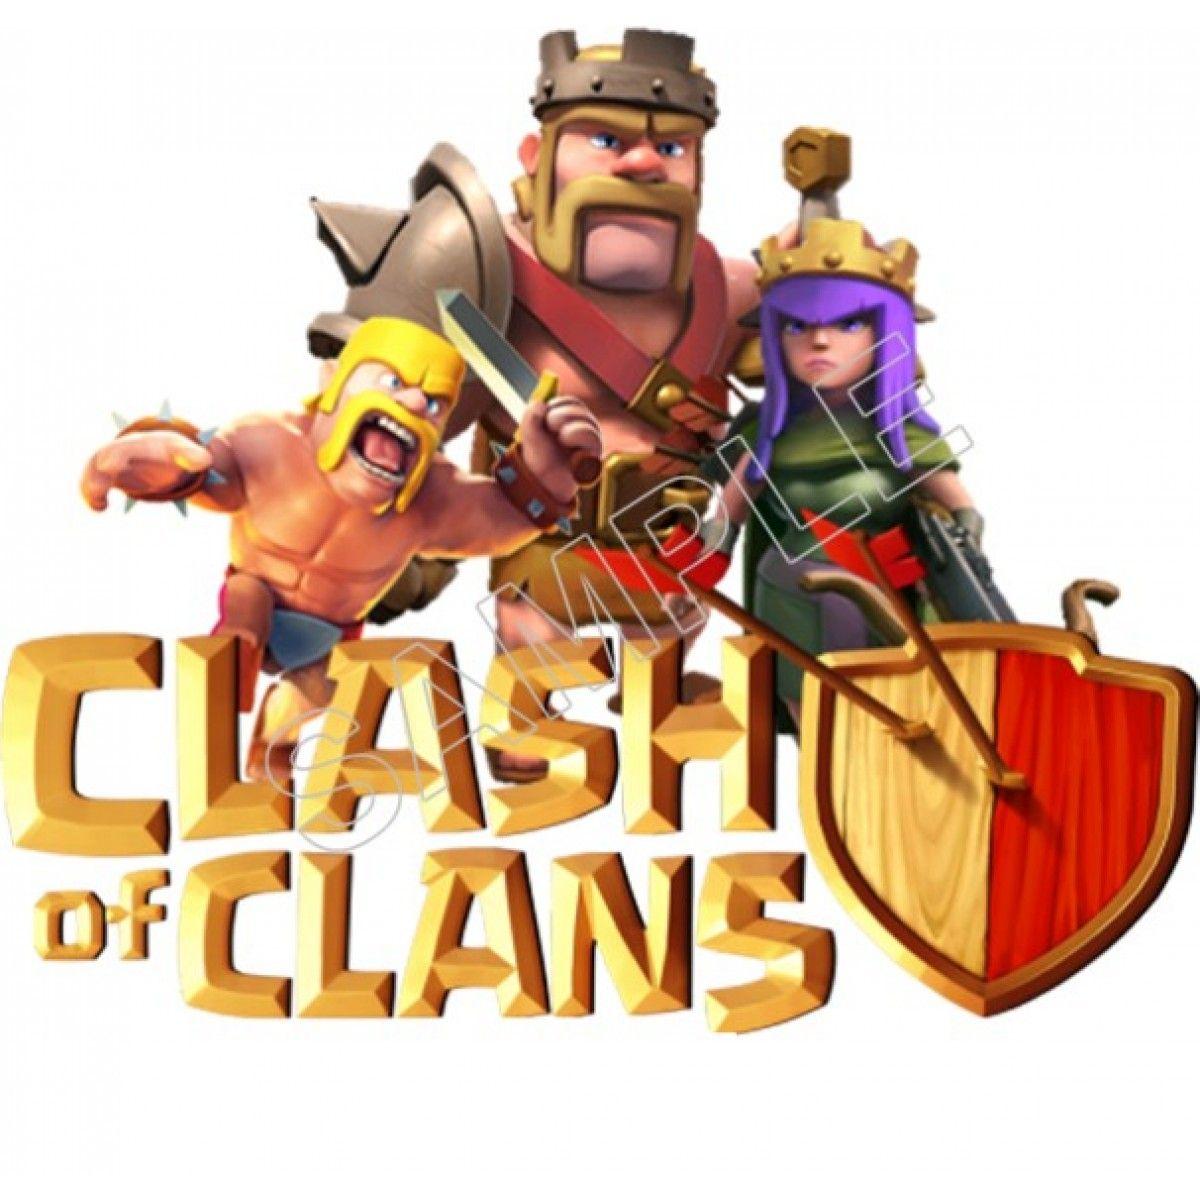 Clash of Clans Logo - clash of clans logo - Free Download